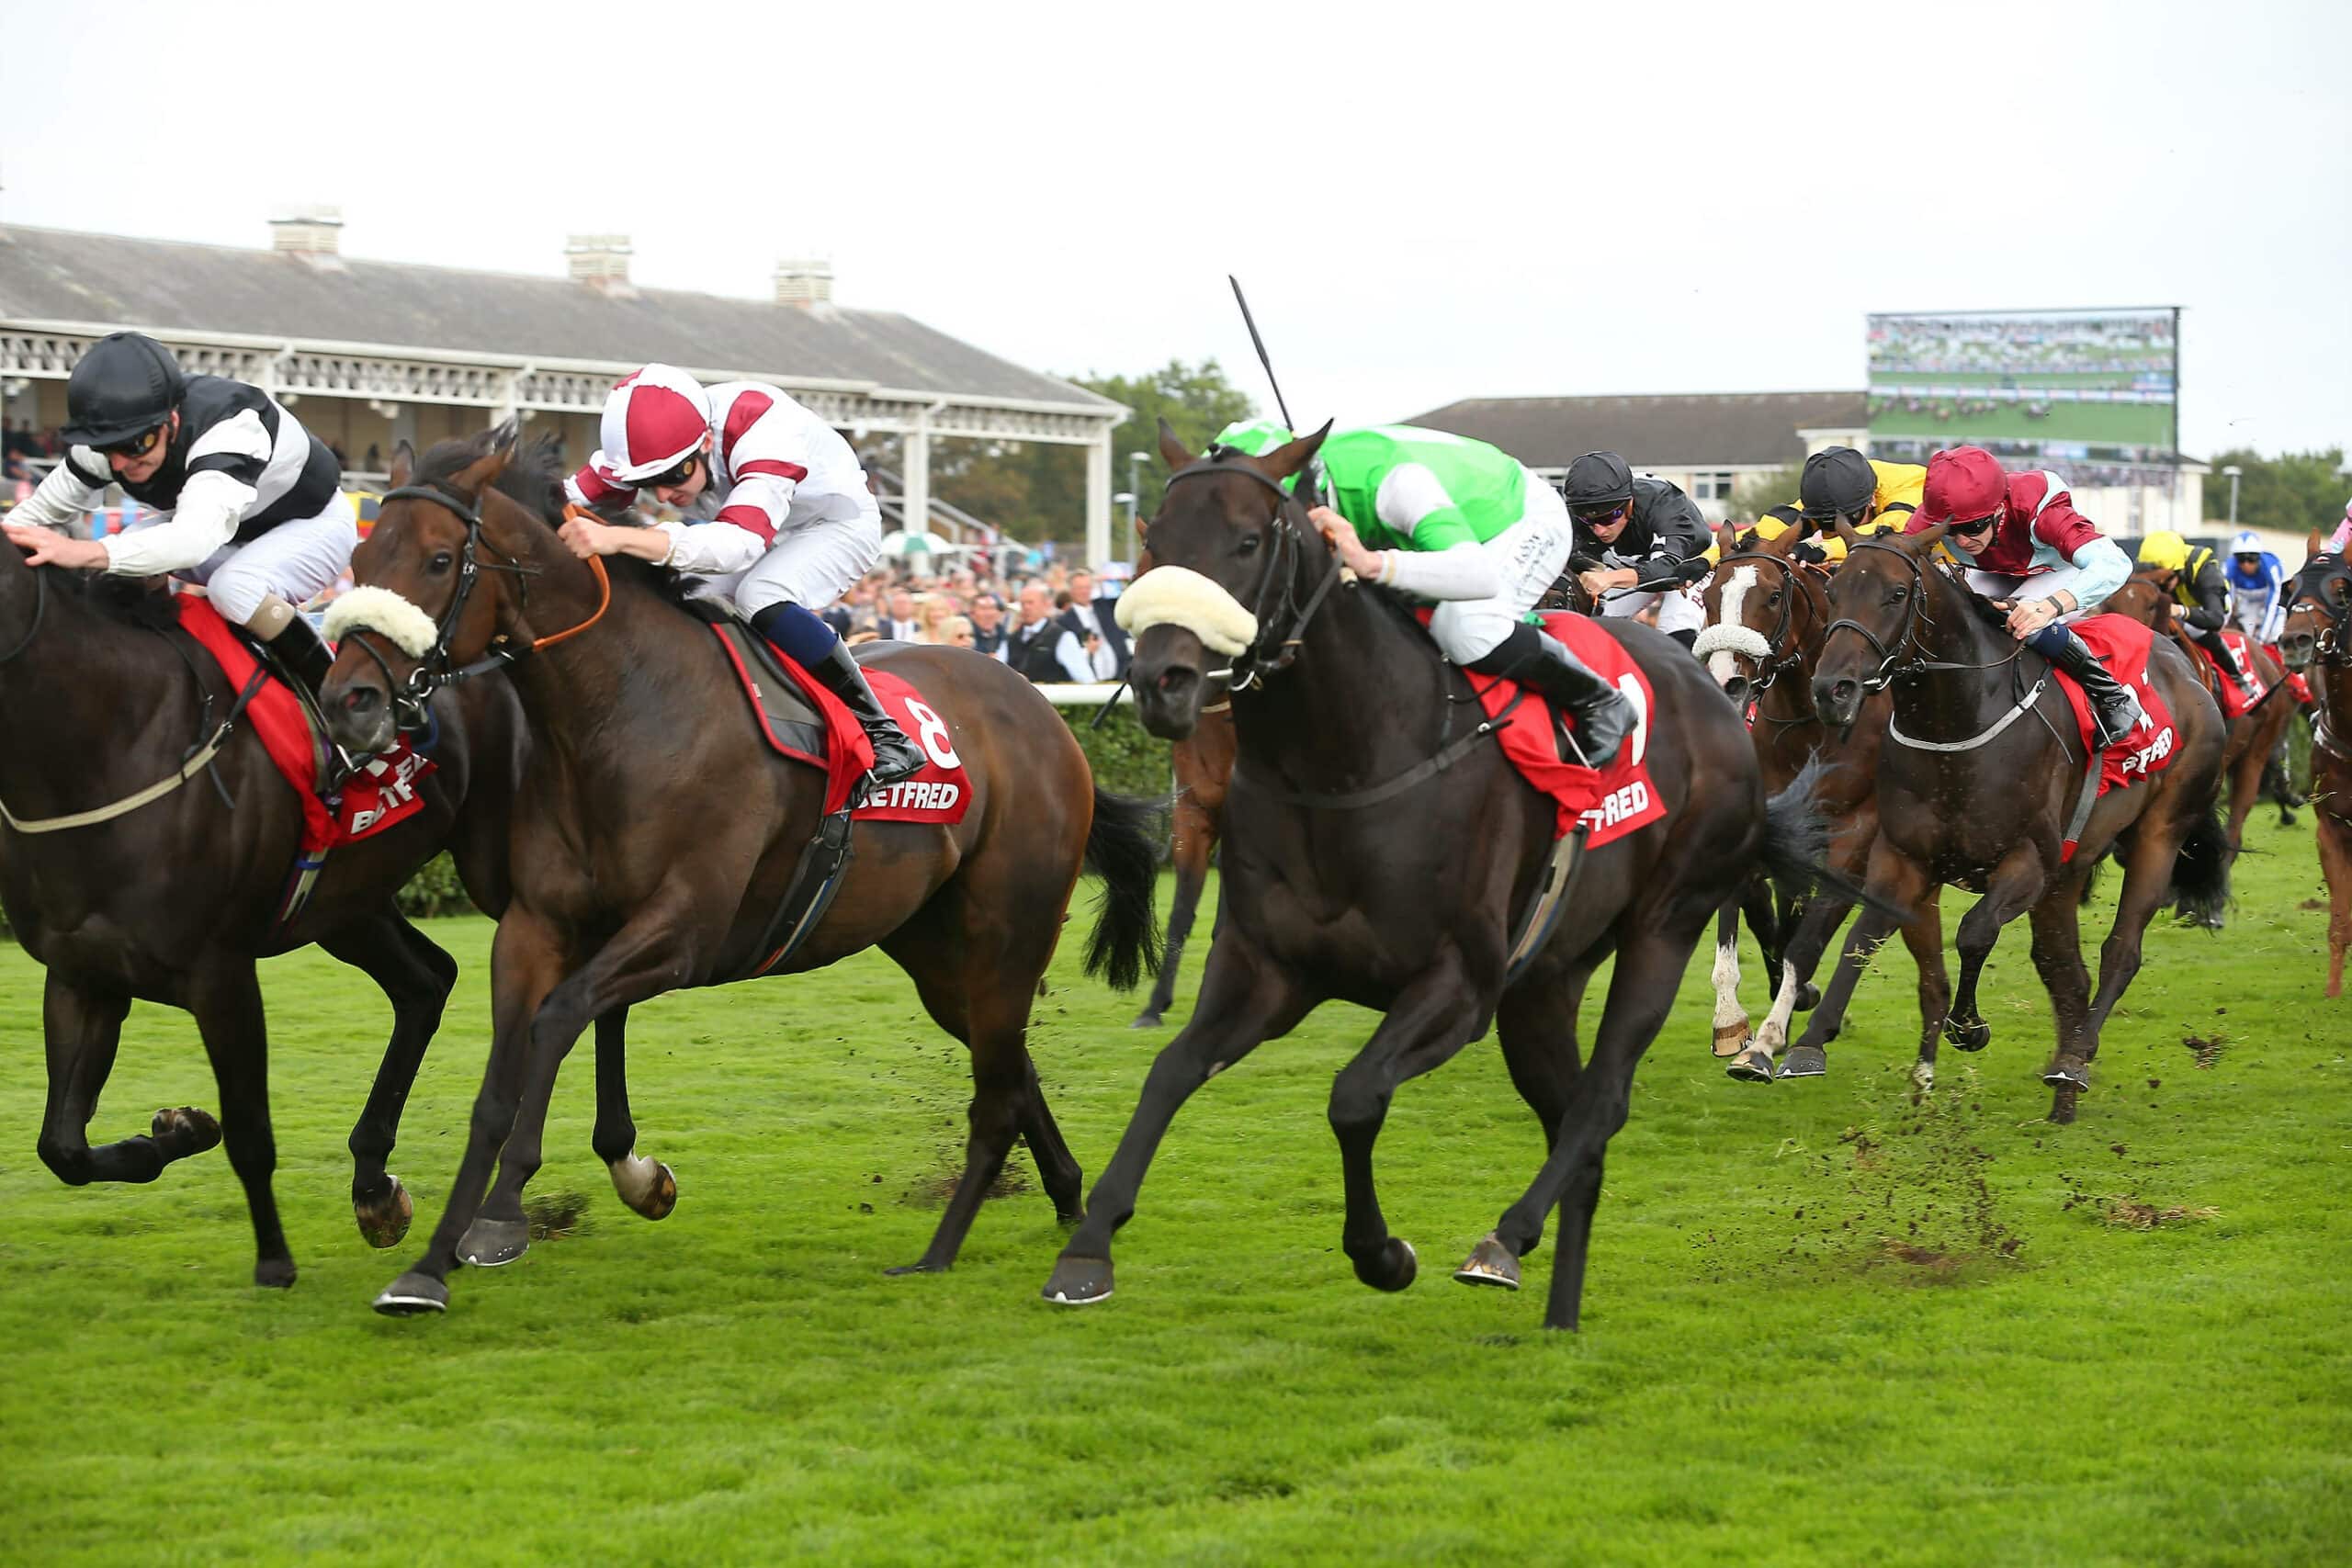 St Leger Recap: Horses on Target for the Cup